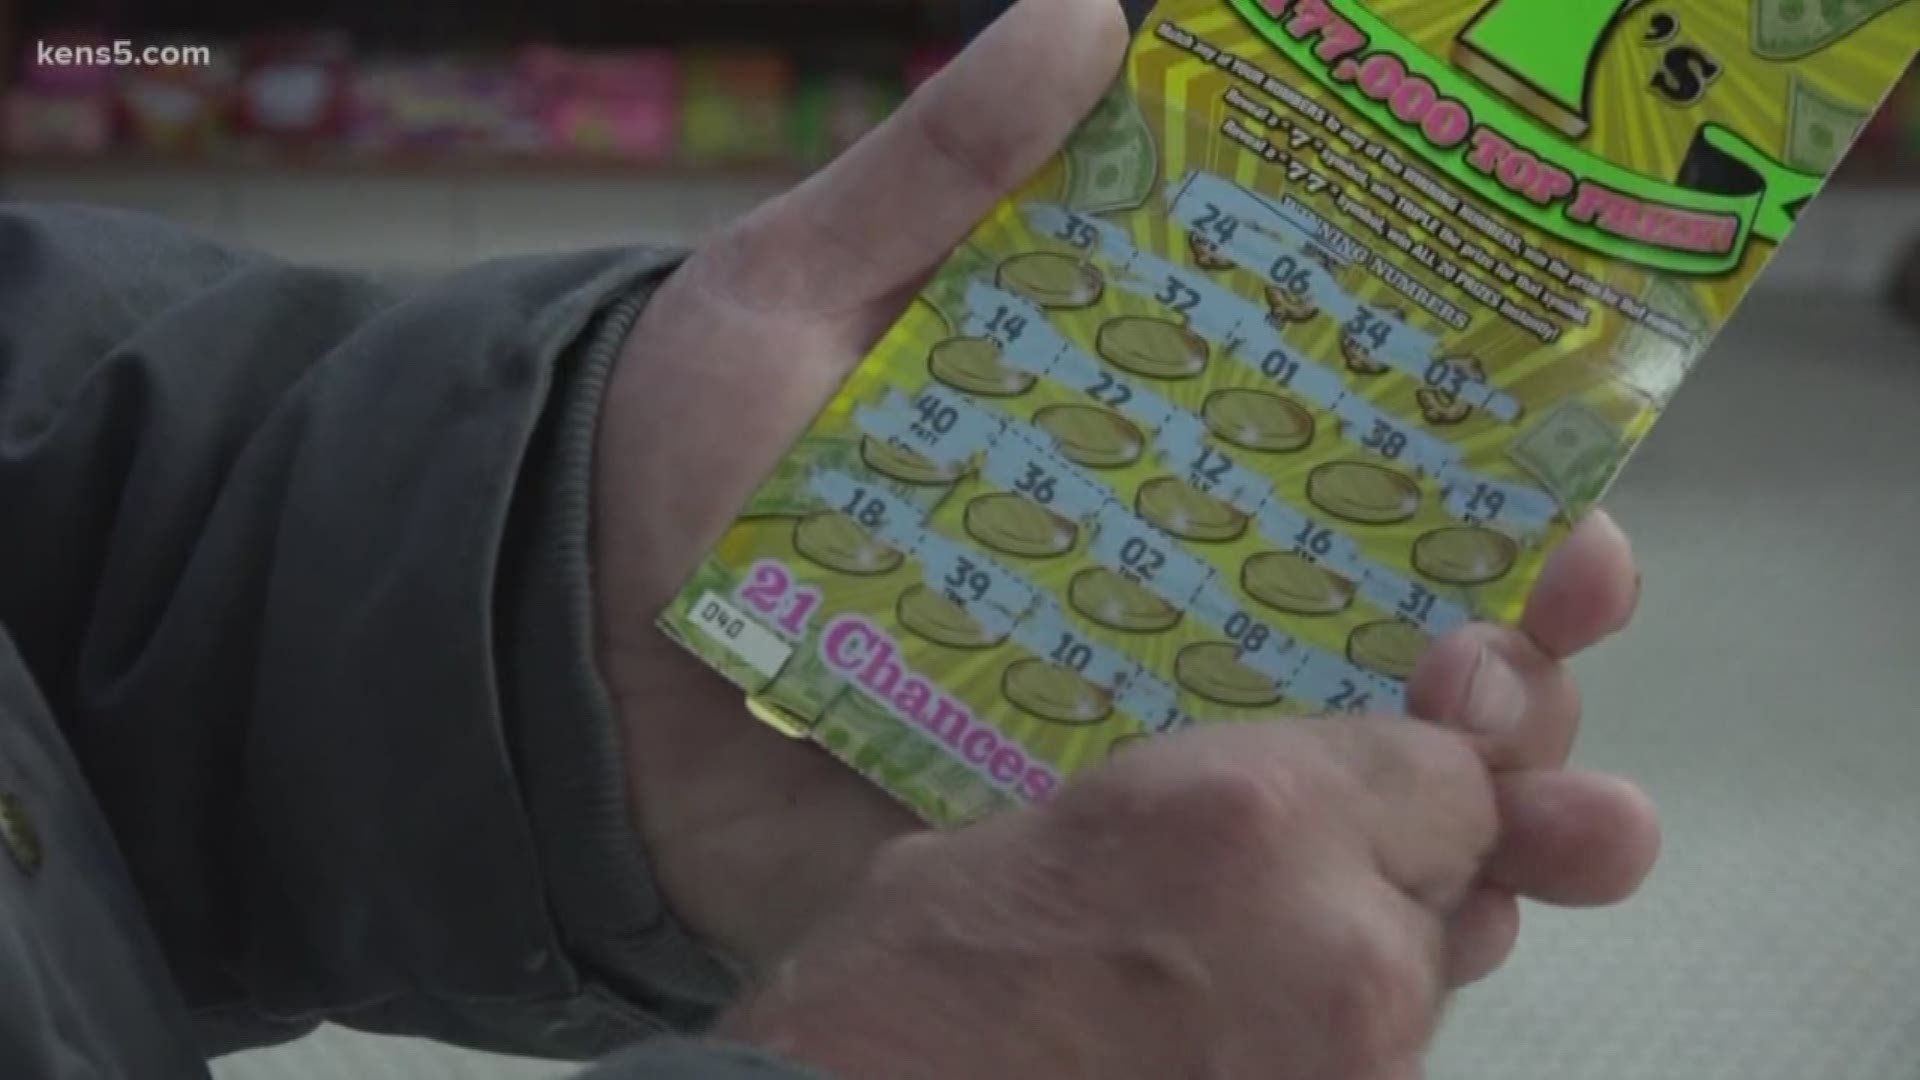 Tuesday night. No one claimed the jackpot, which is now $900 million dollars, but there is a mystery millionaire who won $5 million at a popular downtown San Antonio corner store. Eyewitness News reporter Jon Coker takes us there.